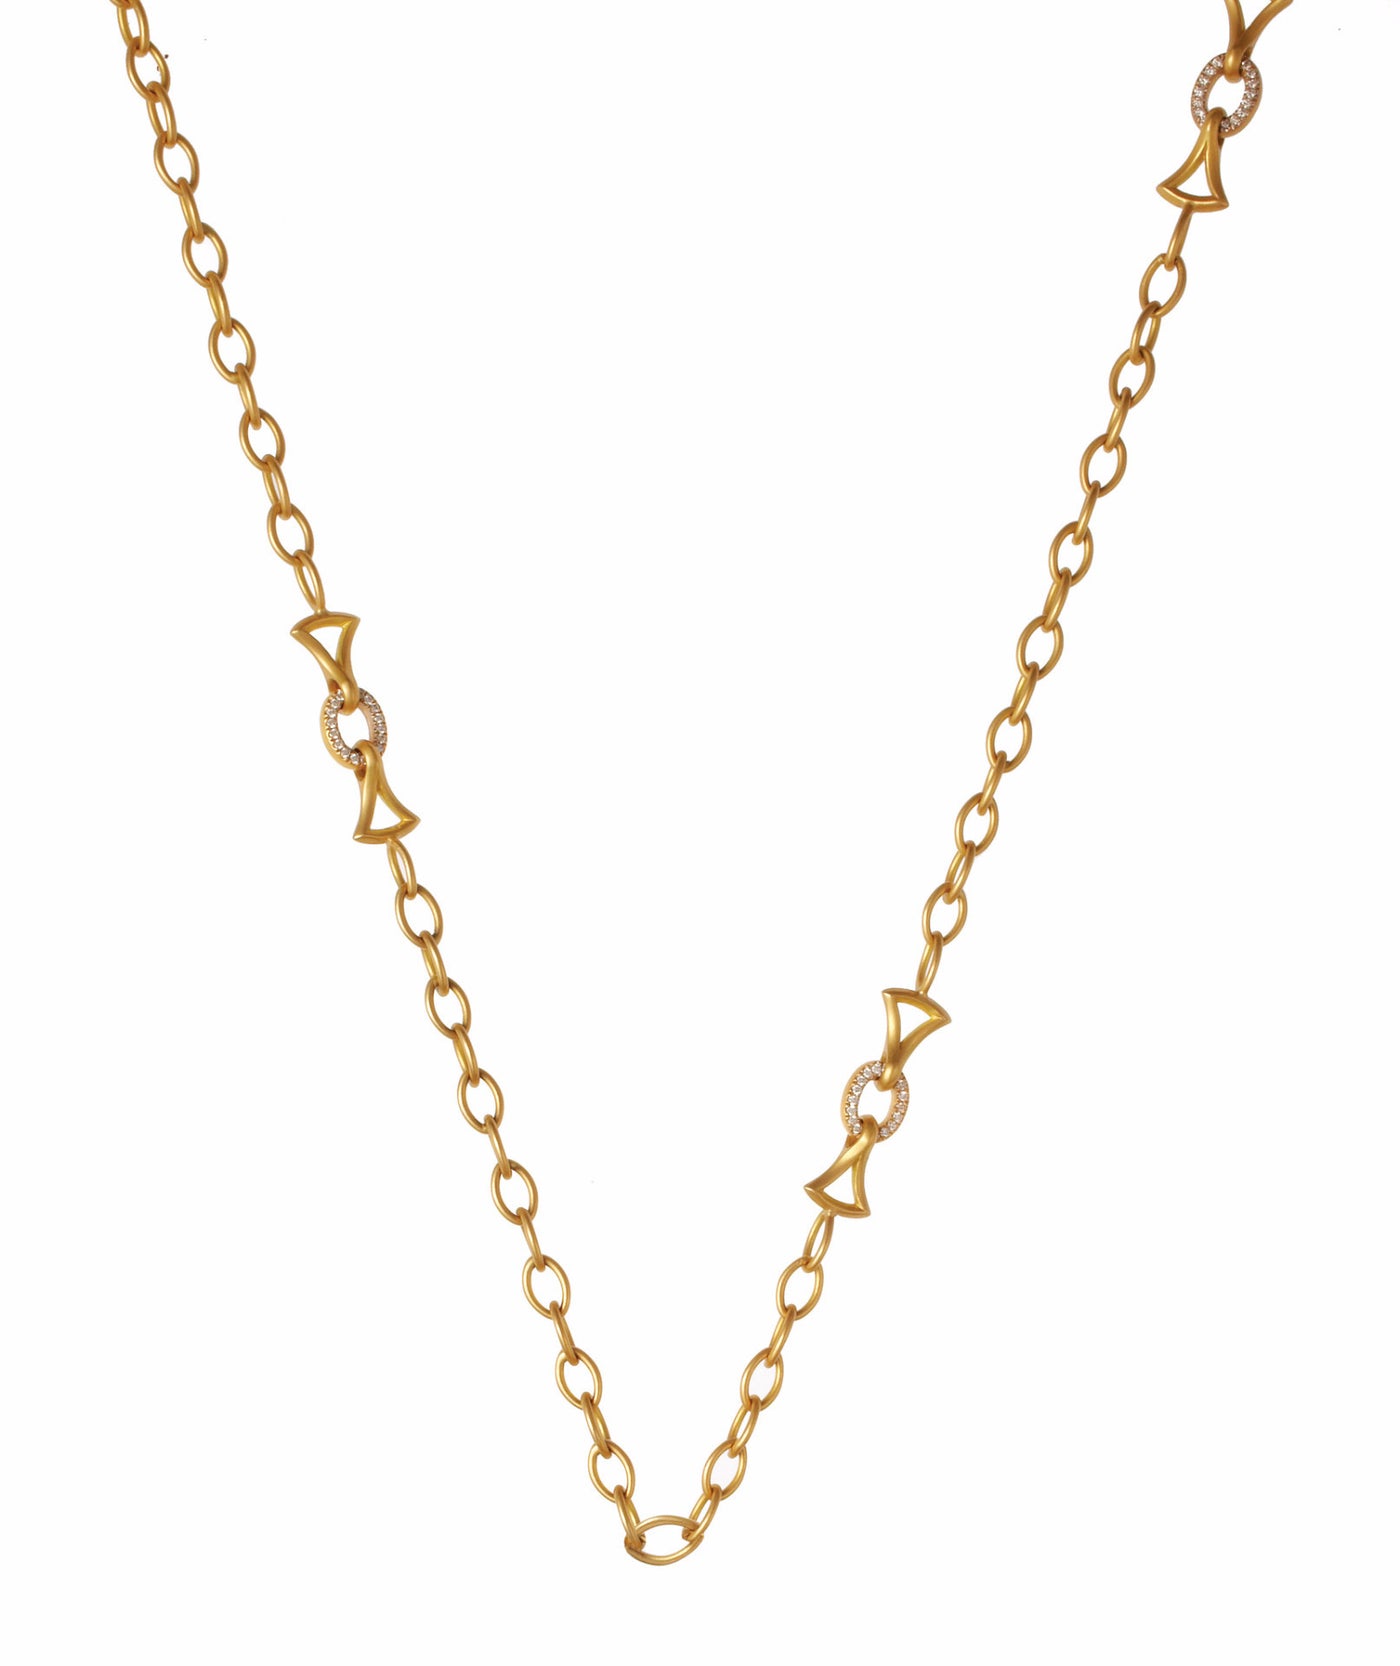 Oval Link Necklace with Triangle Motifs and Pavé Links